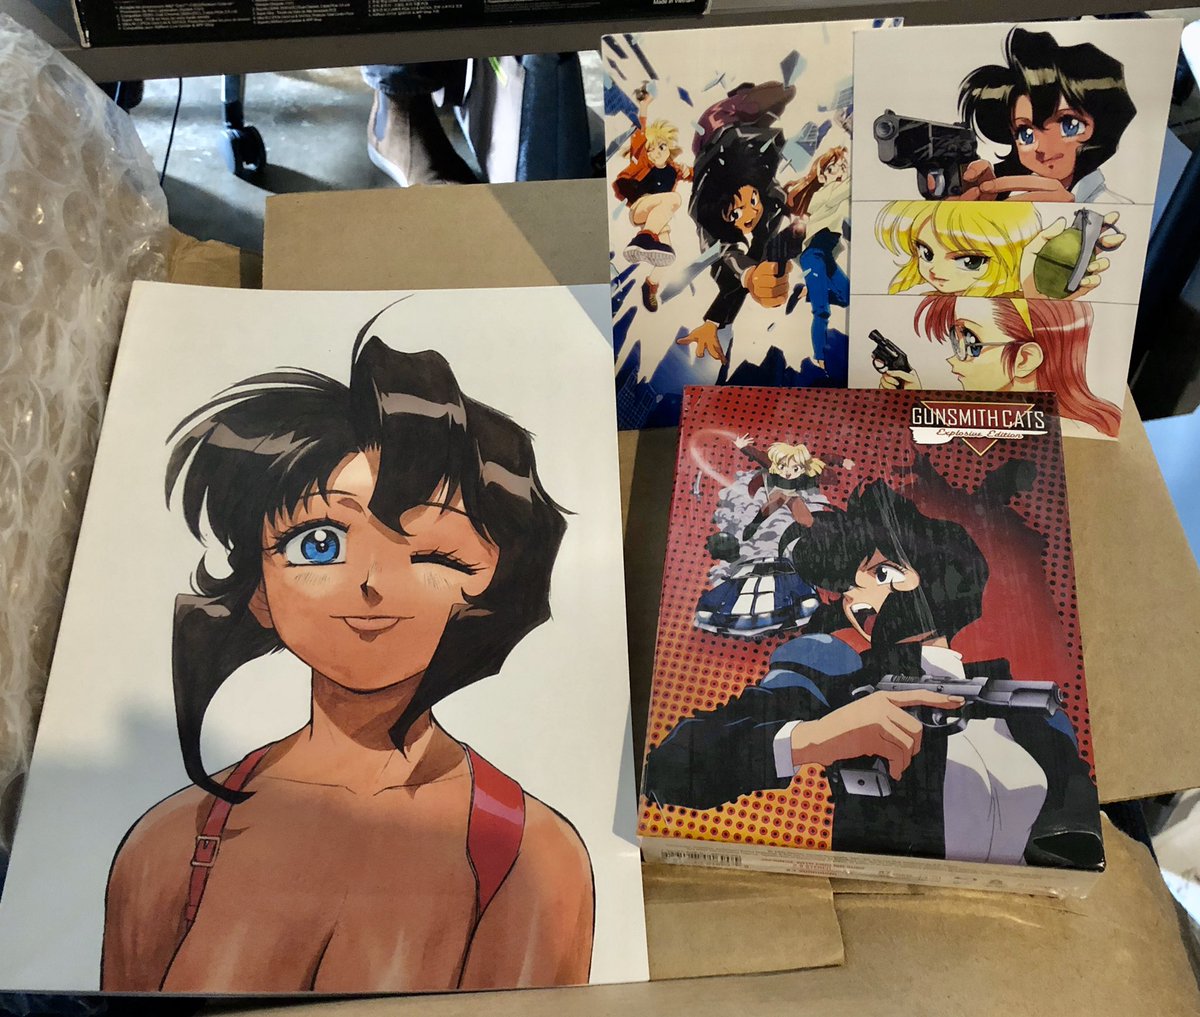 Persona On Twitter Oh Nice My Gunsmith Cats Set Came In It Comes With A Blu Ray Set Original Doujinshi Settei Artbook And Postcards I Didn T Realize Kenichi Sonoda Is Now A